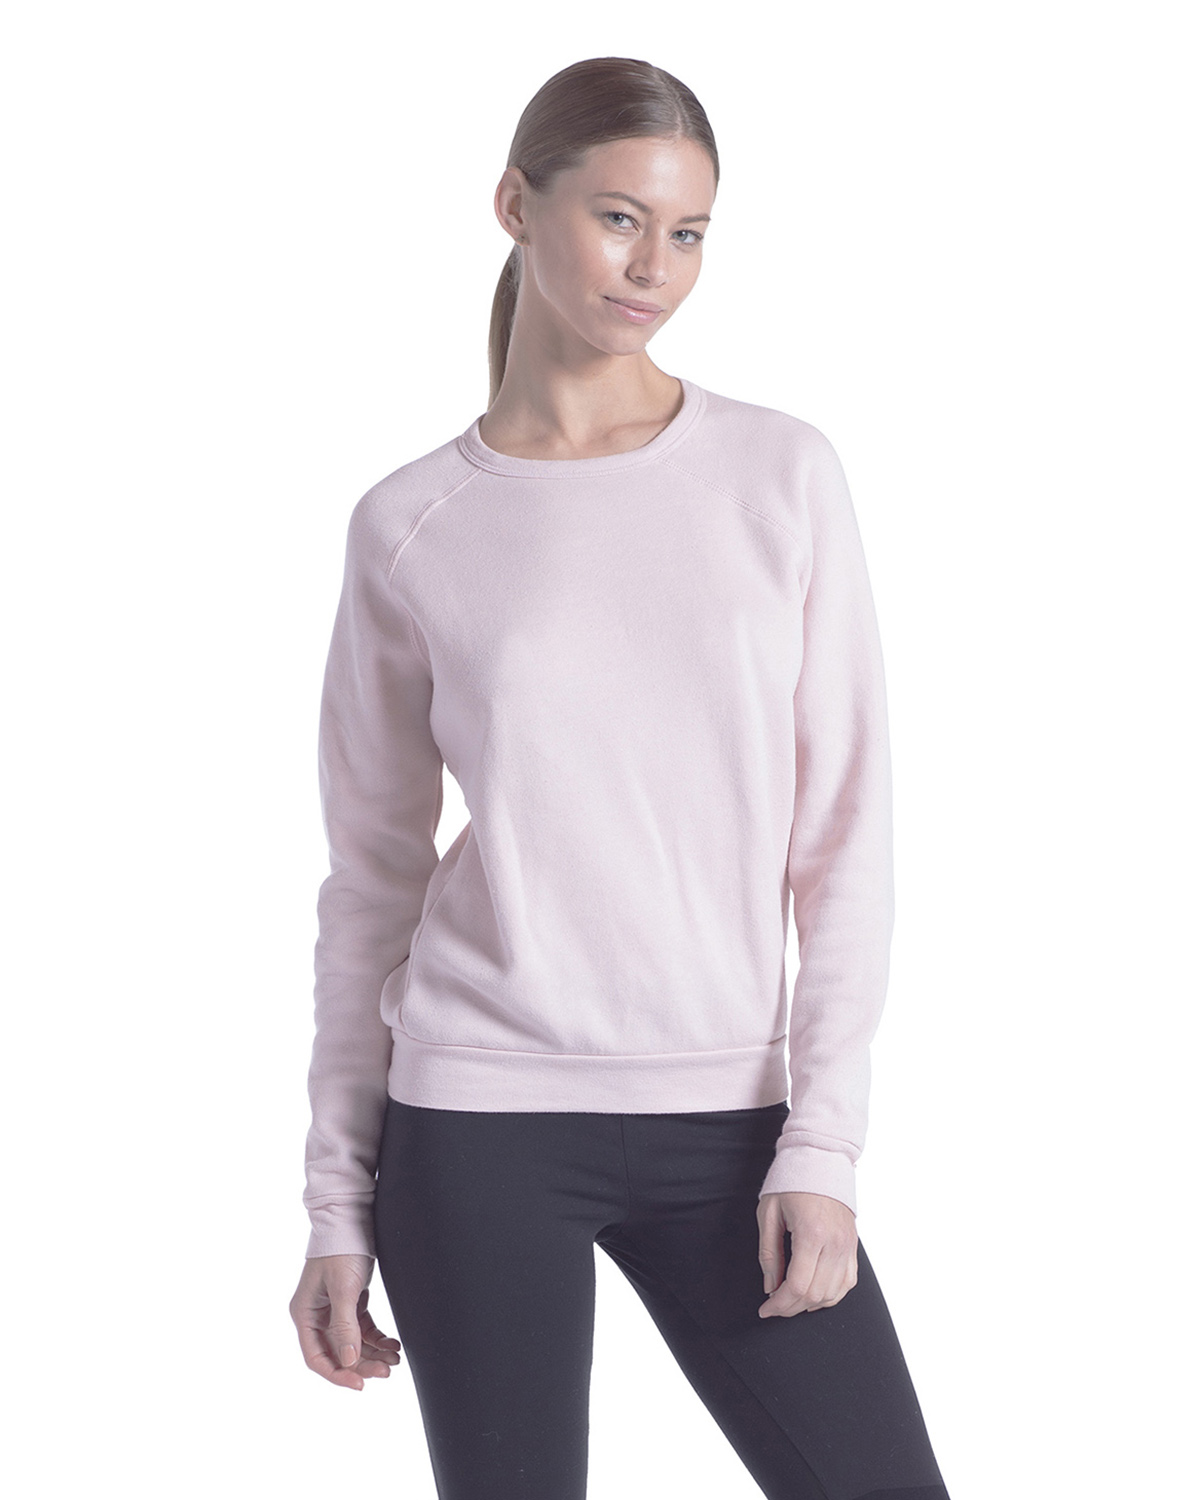 click to view TRI LIGHT PINK